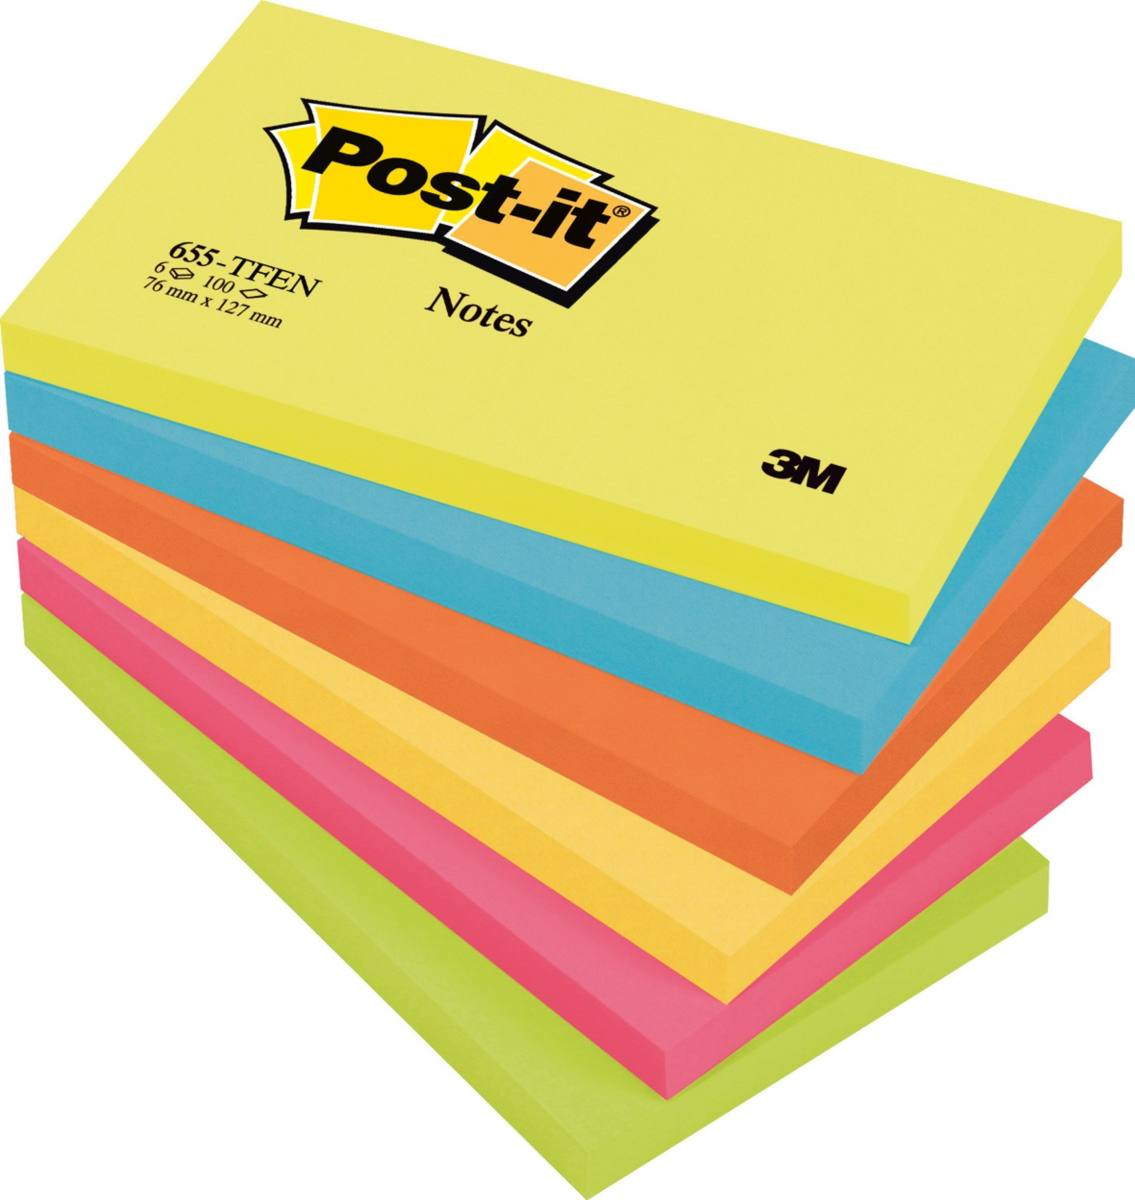 3M Post-it Notes 655TFEN, 127 x 76 mm, neon green, neon orange, ultra blue, ultra yellow, ultra pink, 6 pads of 100 sheets each